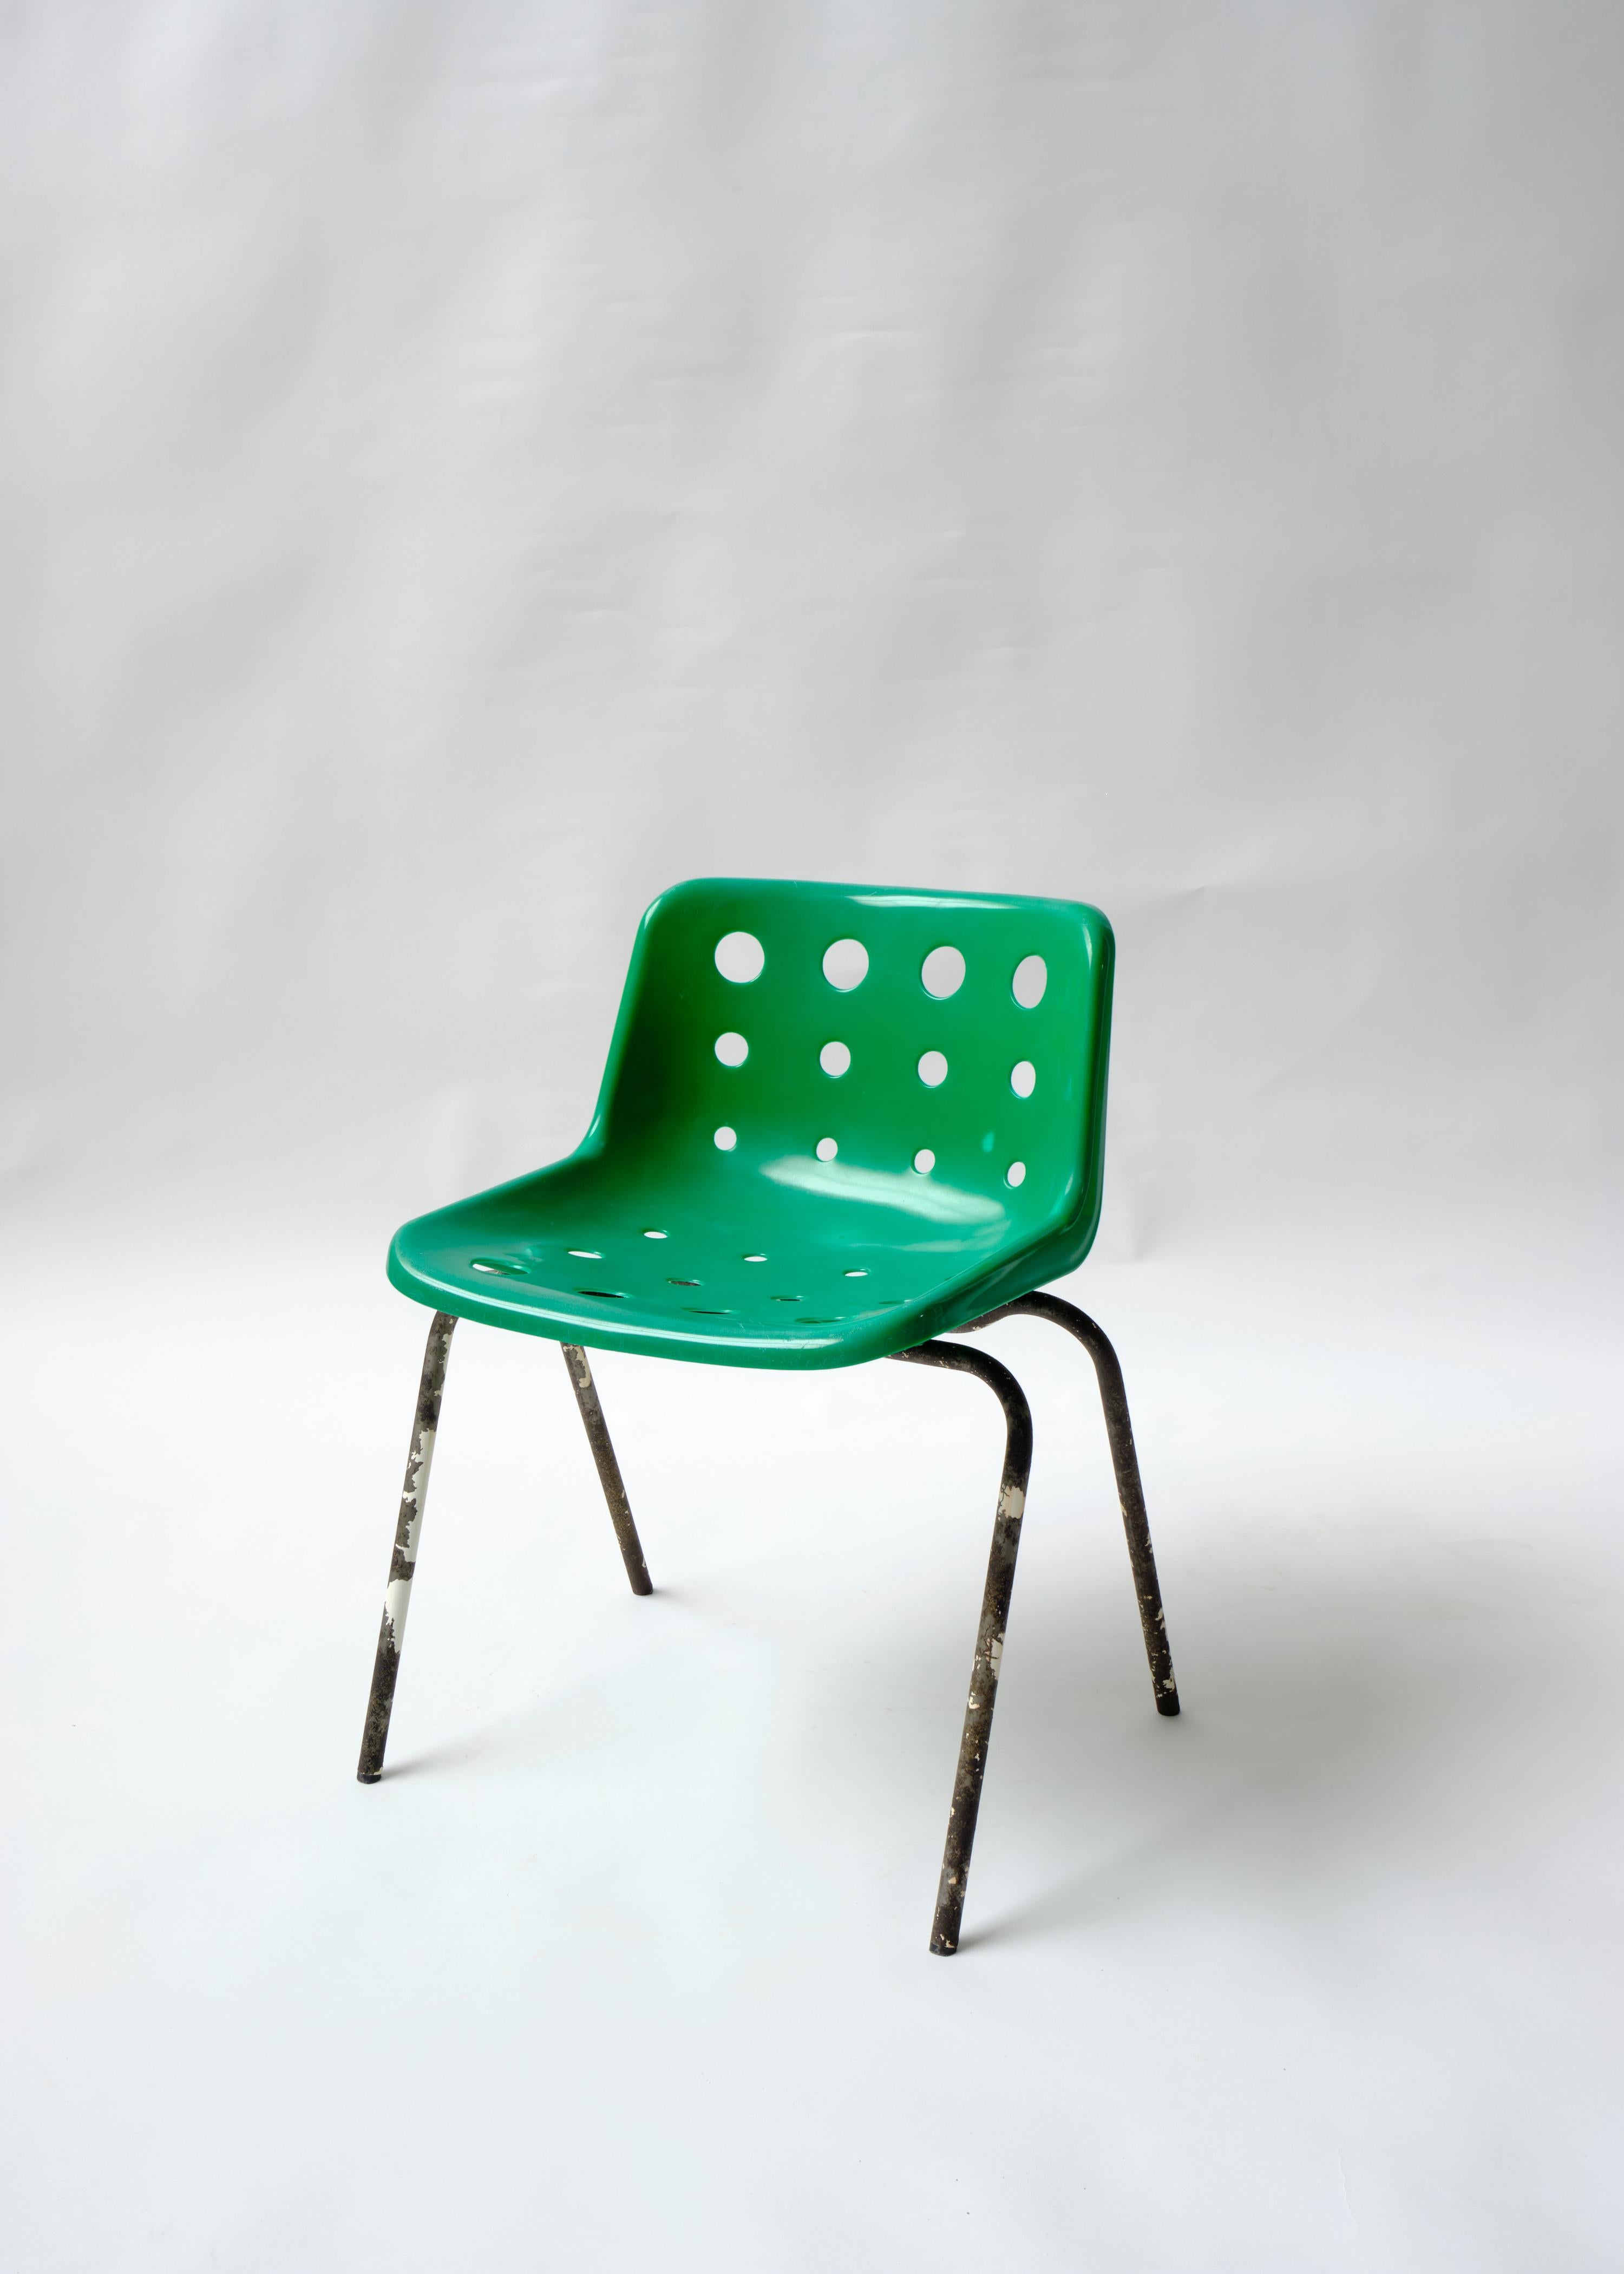 Iconic, retro, stackable. Classic 20th century British Design. 

The Polo chair was one of Robin Day's later iterations of the original moulded Polyside Chair, so ubiquitous with public institutions across the world. Designed around a decade later,